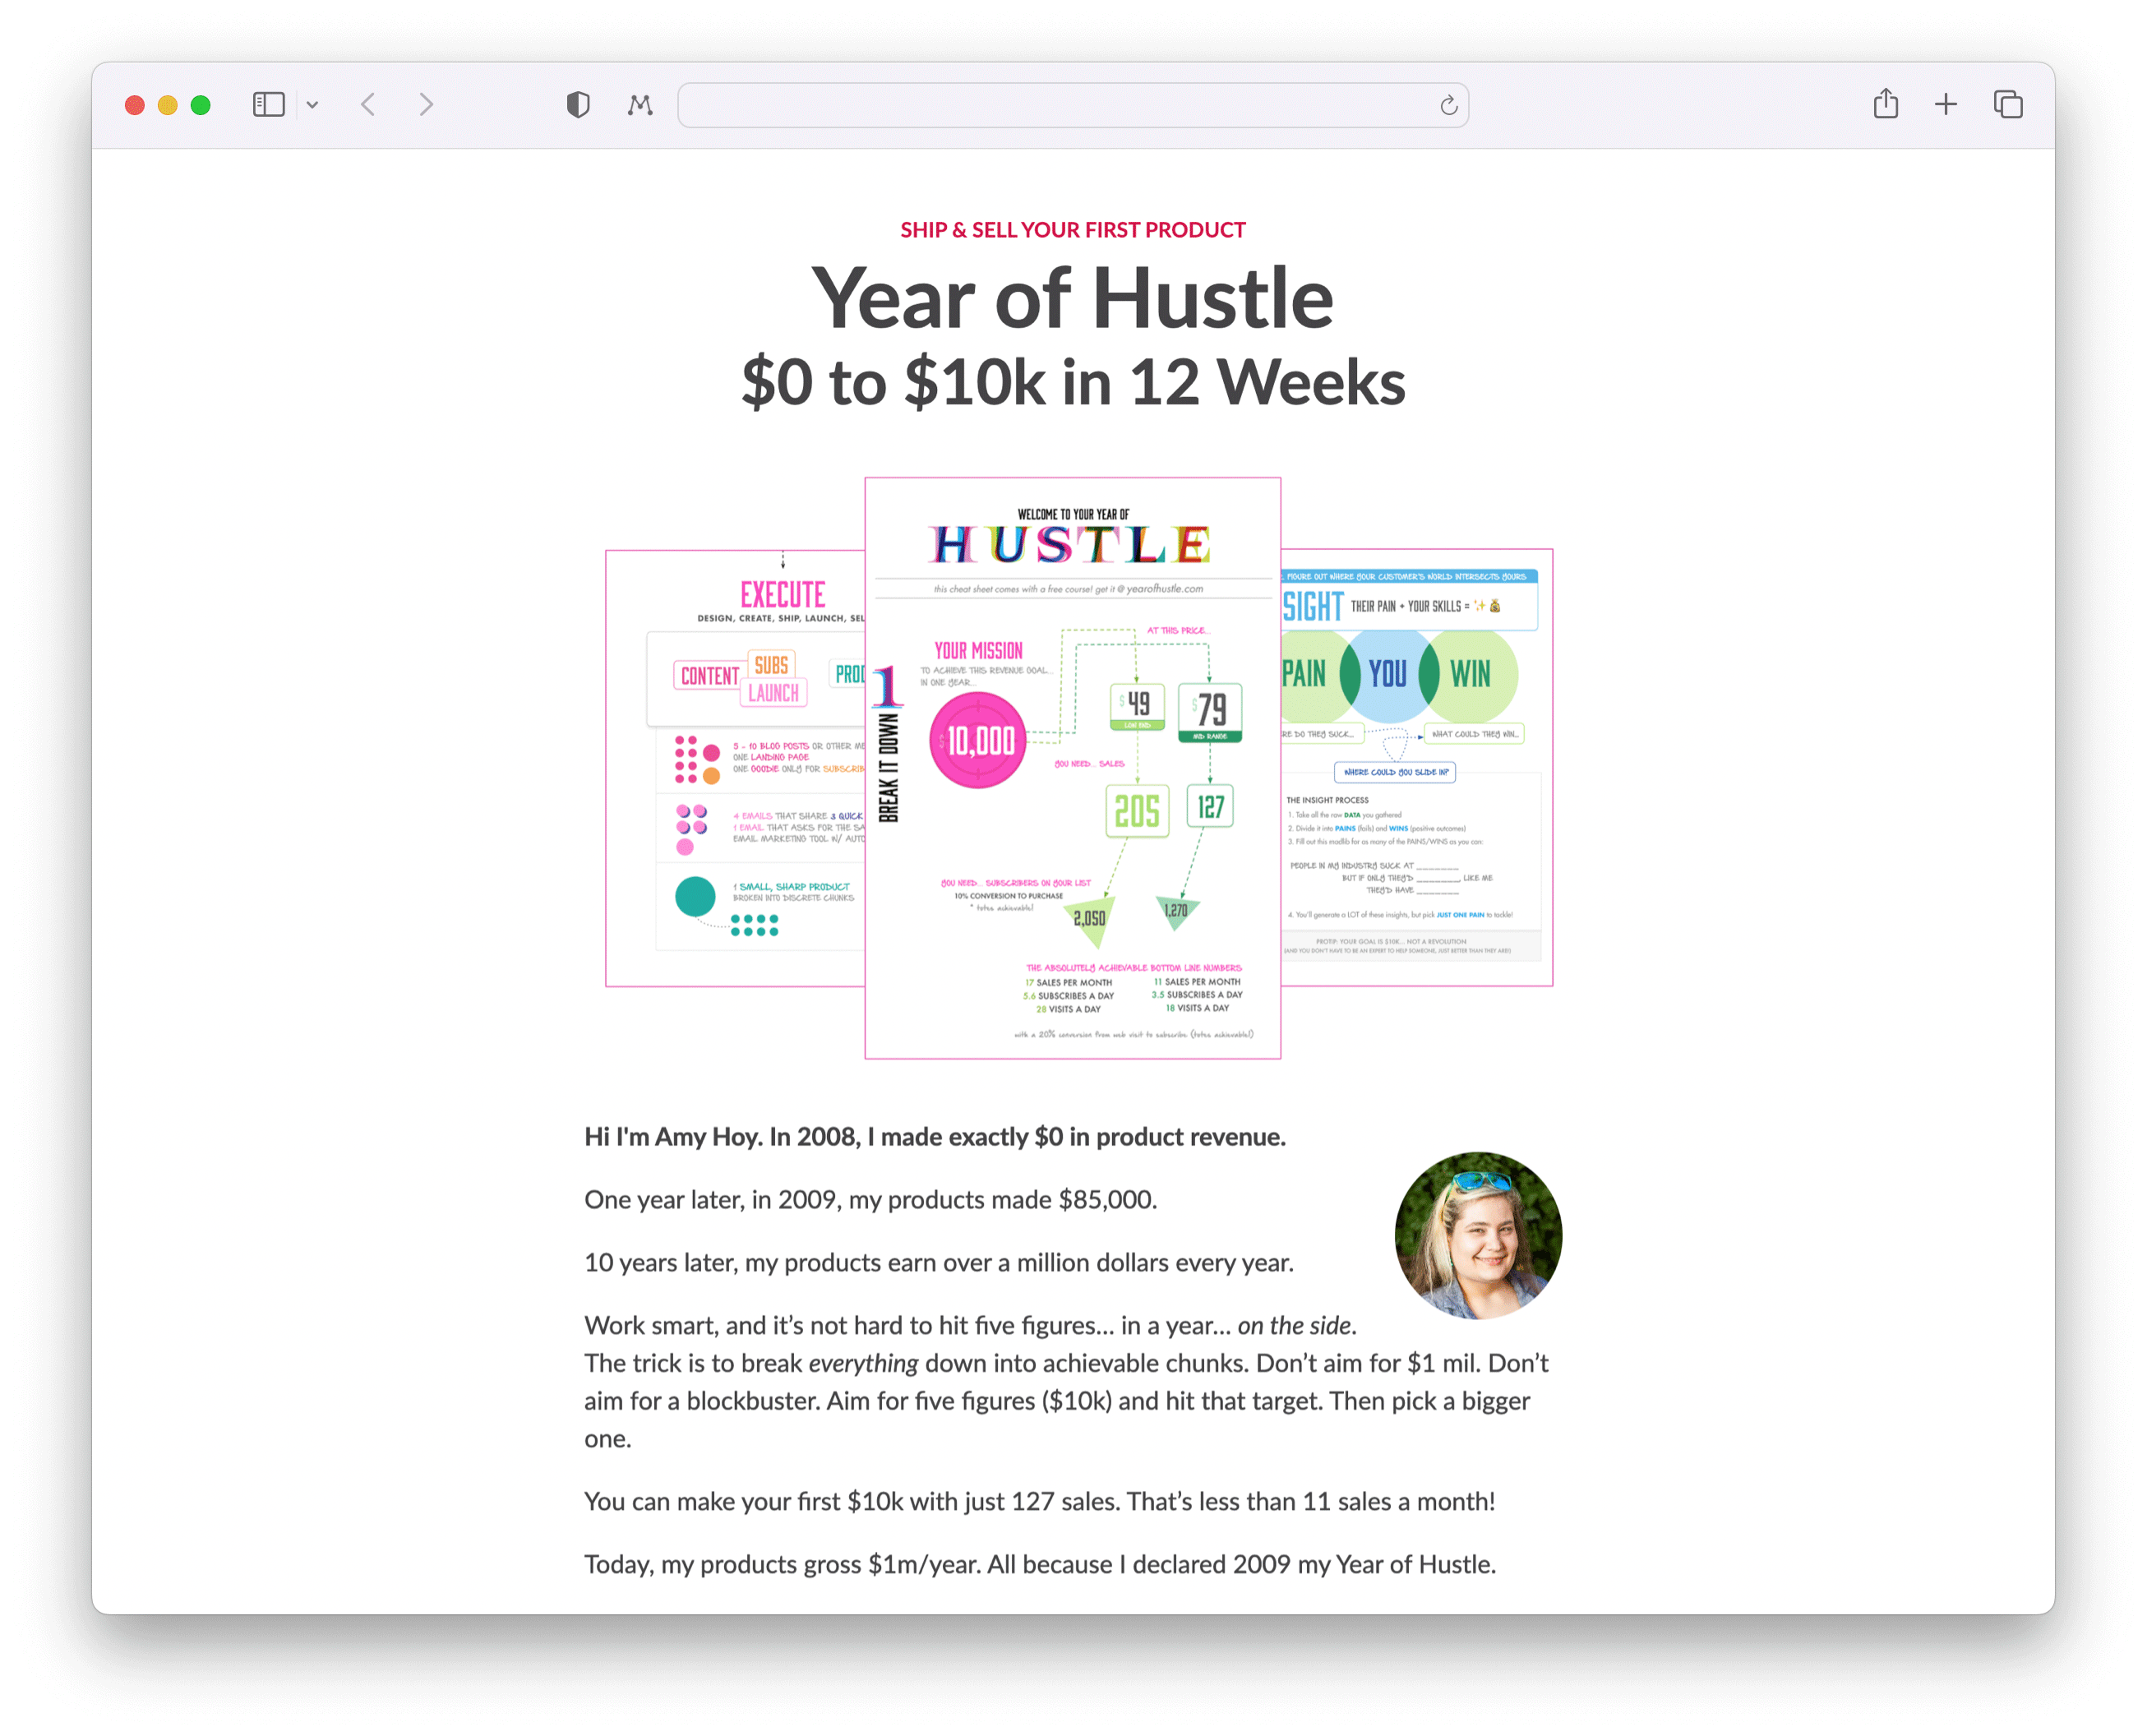 a very simple landing page, headline: Year of Hustle, $0 to $10,000 in 12 weeks, 3 overlaid screenshots from the cheat sheet, and some simple text